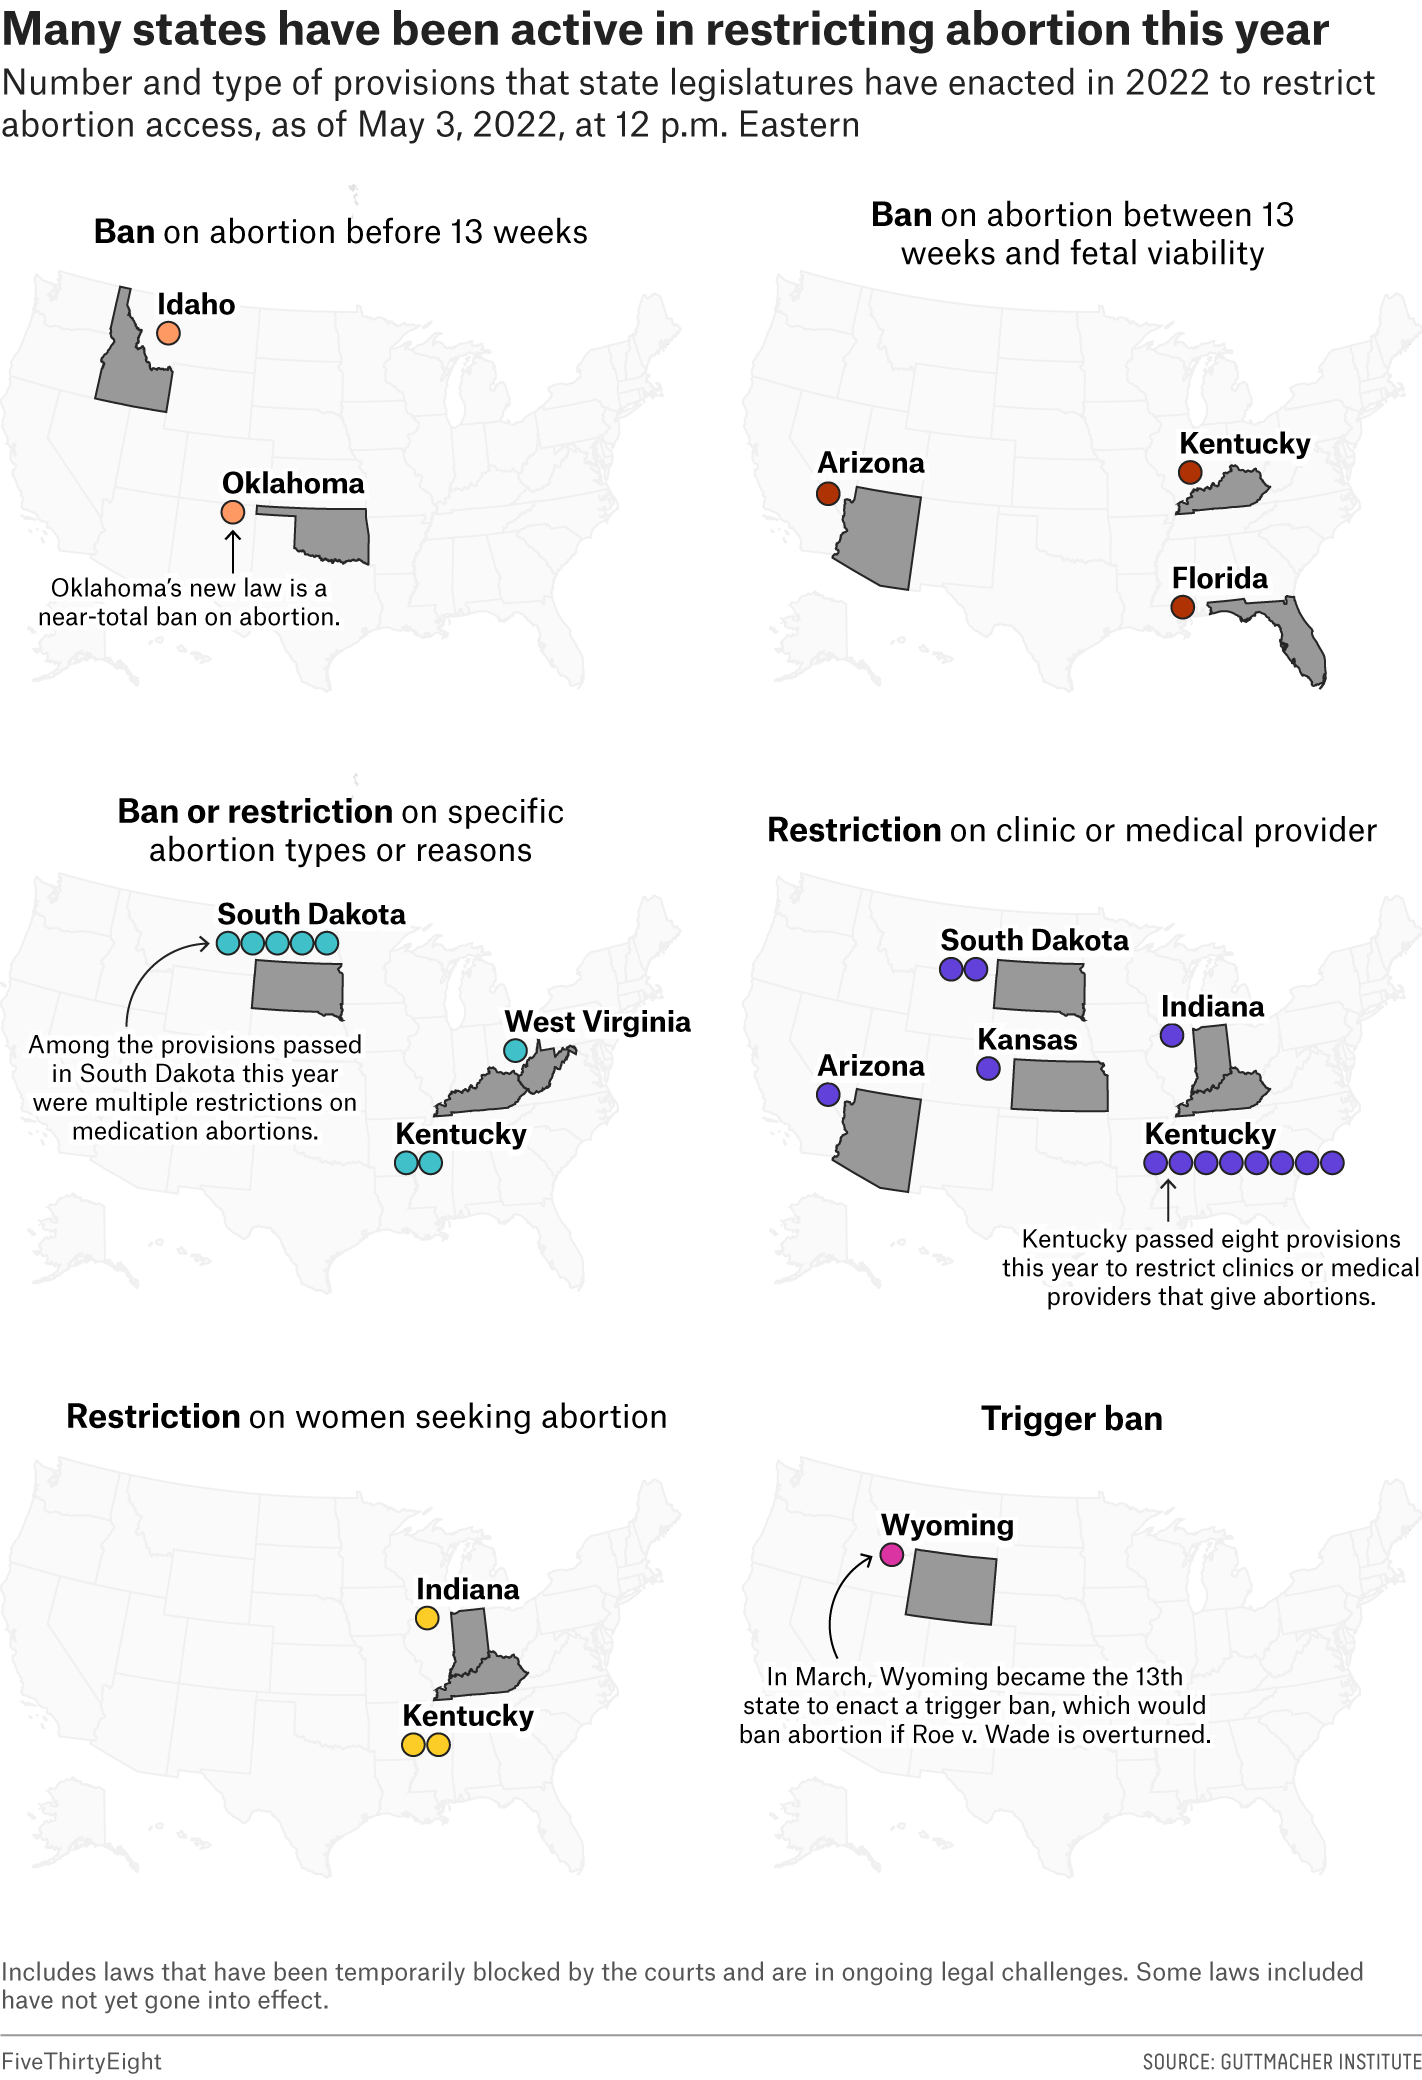 Maps of the number and types of provisions that state legislatures have enacted in 2022 to restrict abortion access, as of May 3, 2022, at 12 p.m. Eastern. Nine states have enacted nearly three-dozen abortion restrictions, including a near-total ban in Oklahoma and a trigger ban in Wyoming (which became the 13th state to enact such a ban).